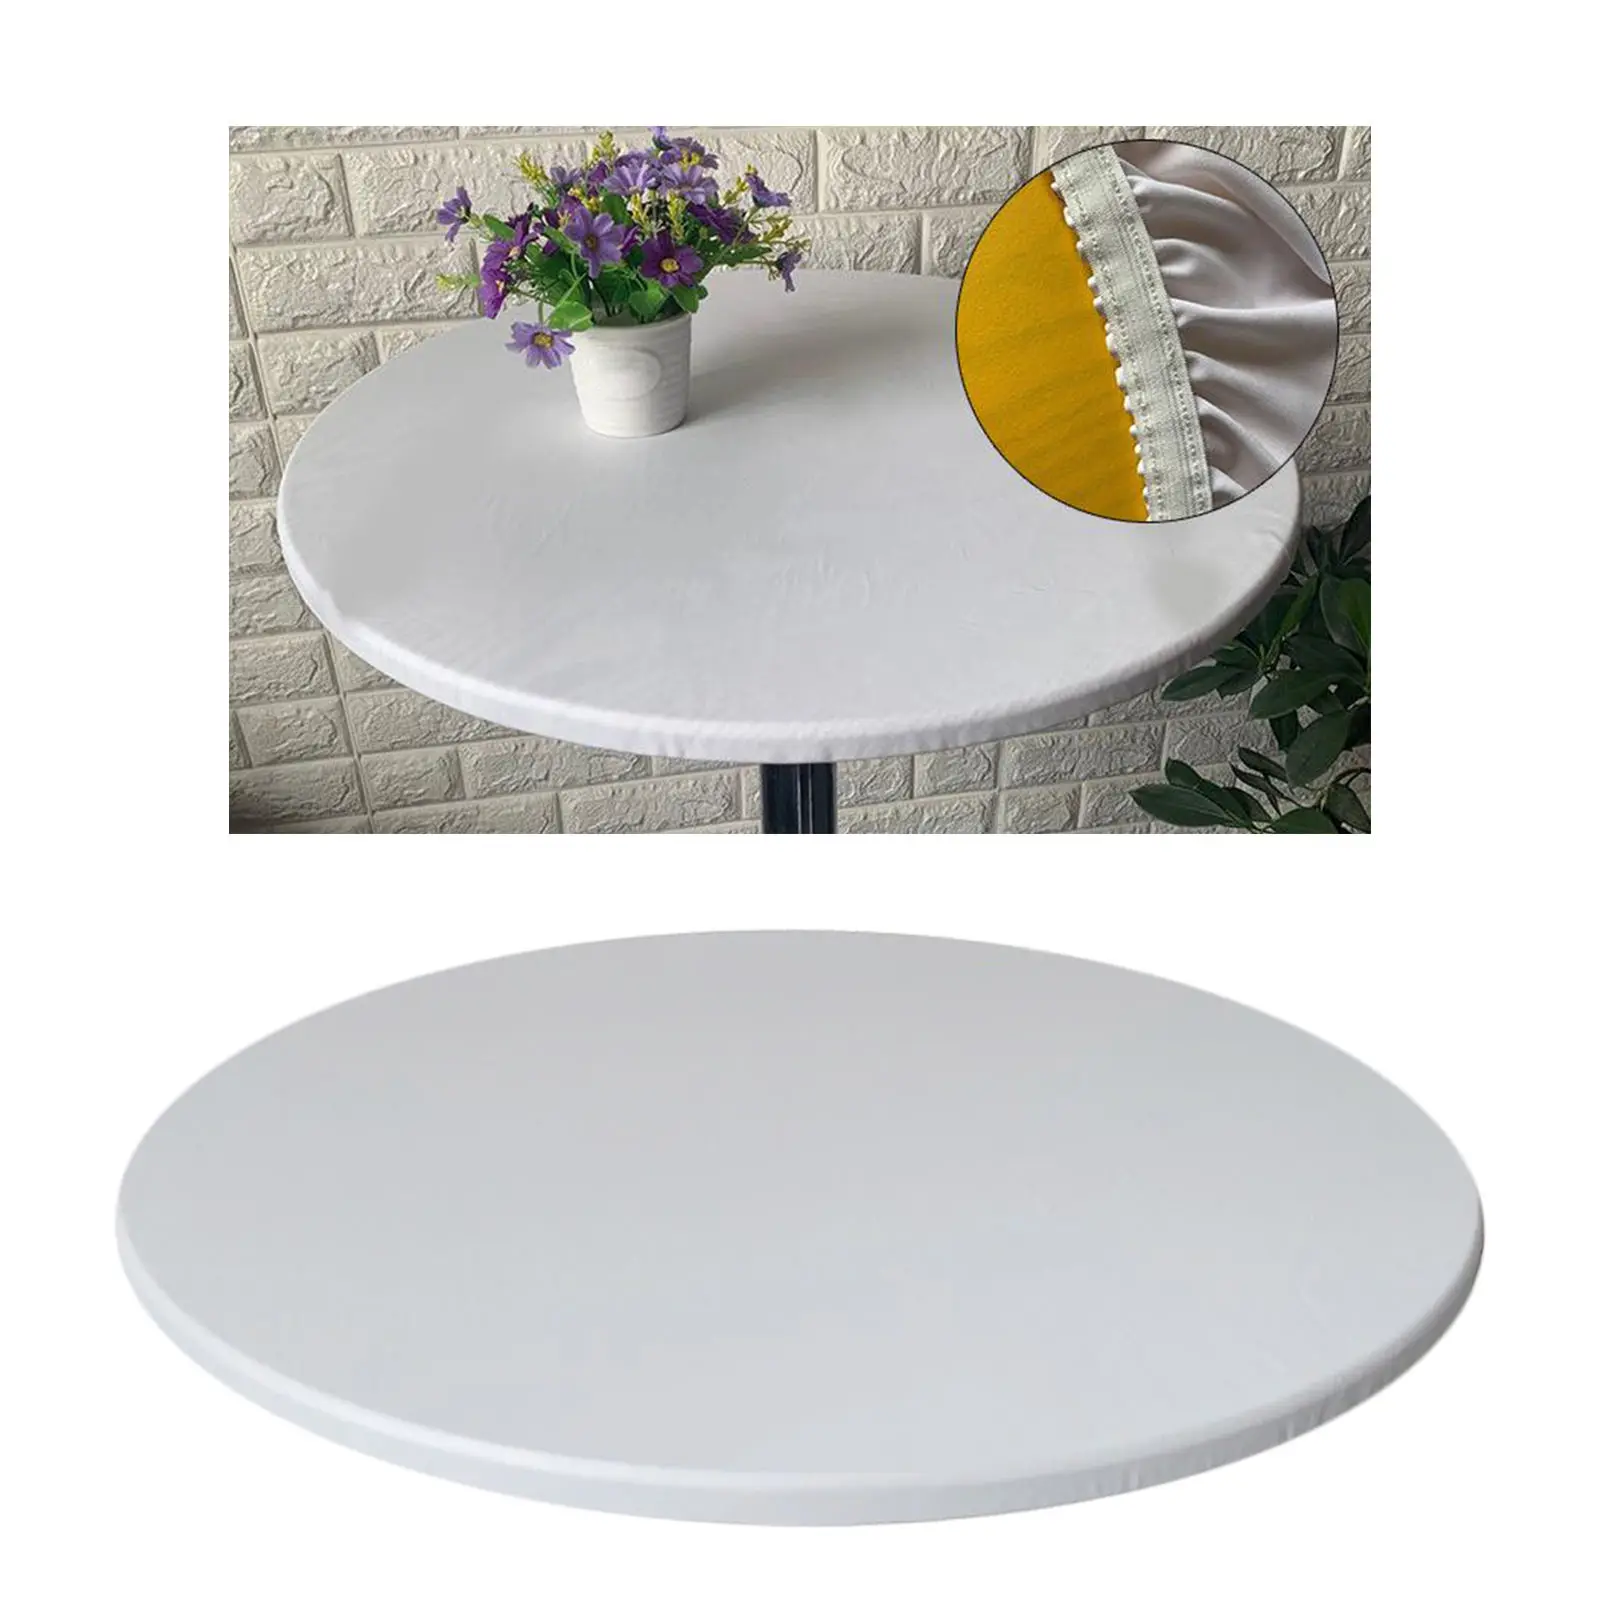 Anti-slip Round Table Cover Cloth Waterproof Tablecover Protector Fit 60cm Diameter